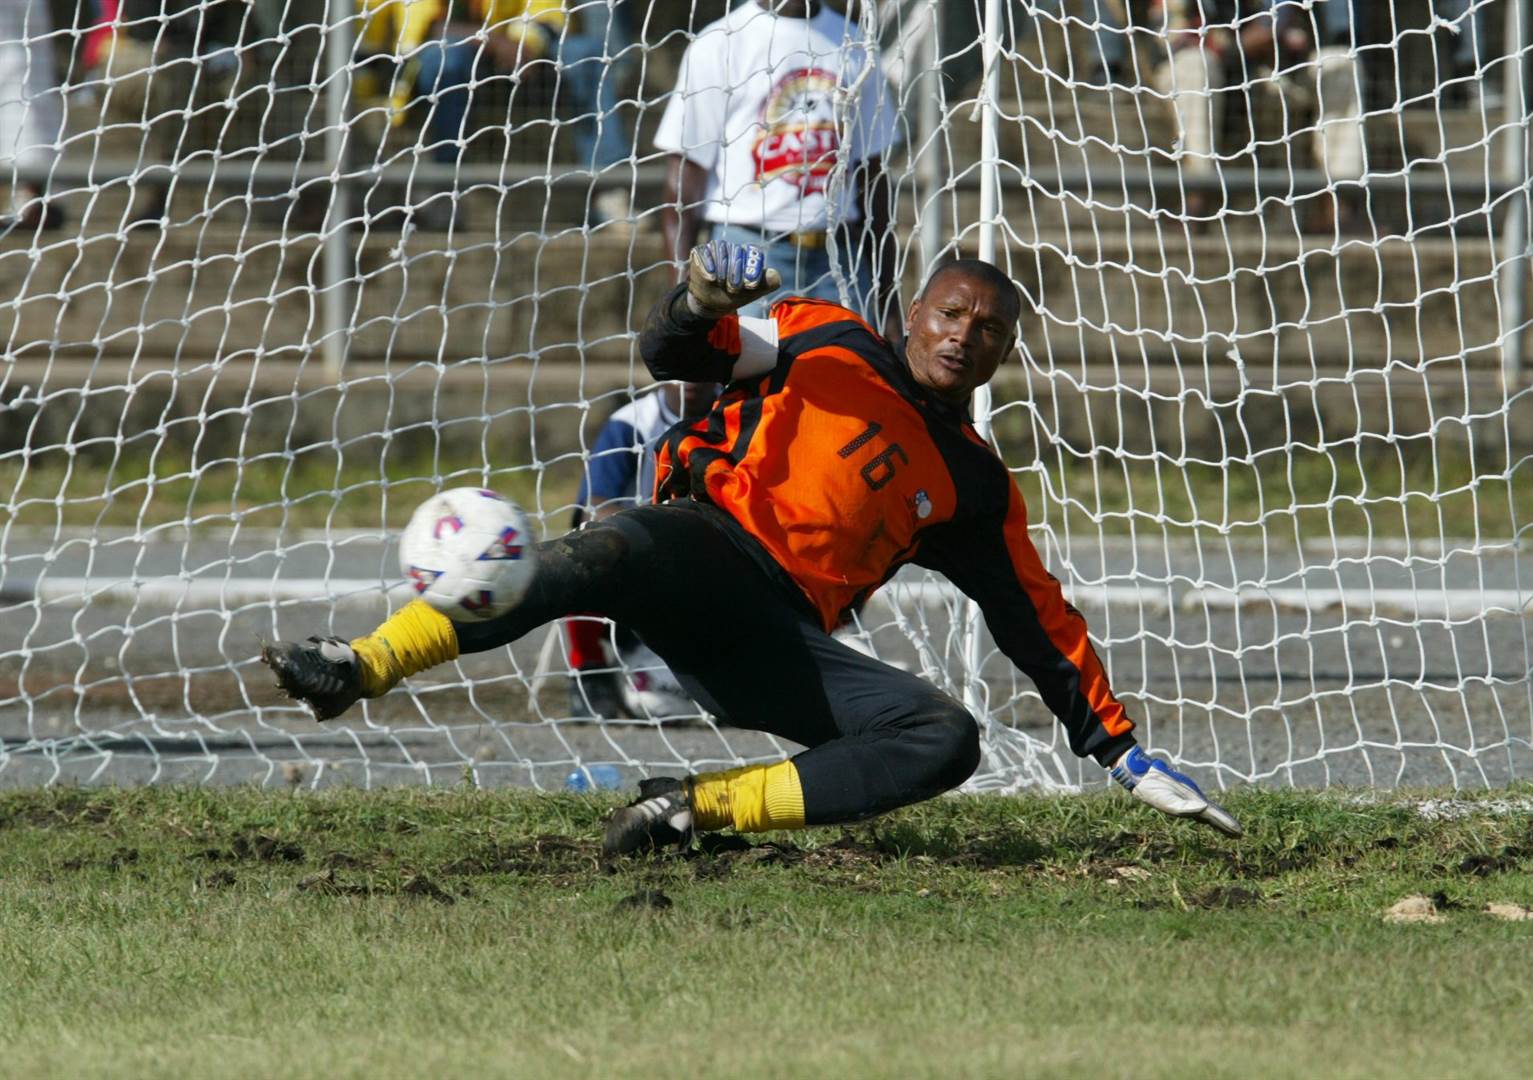 GK - John Tlale – Great shot-stopper and distribut